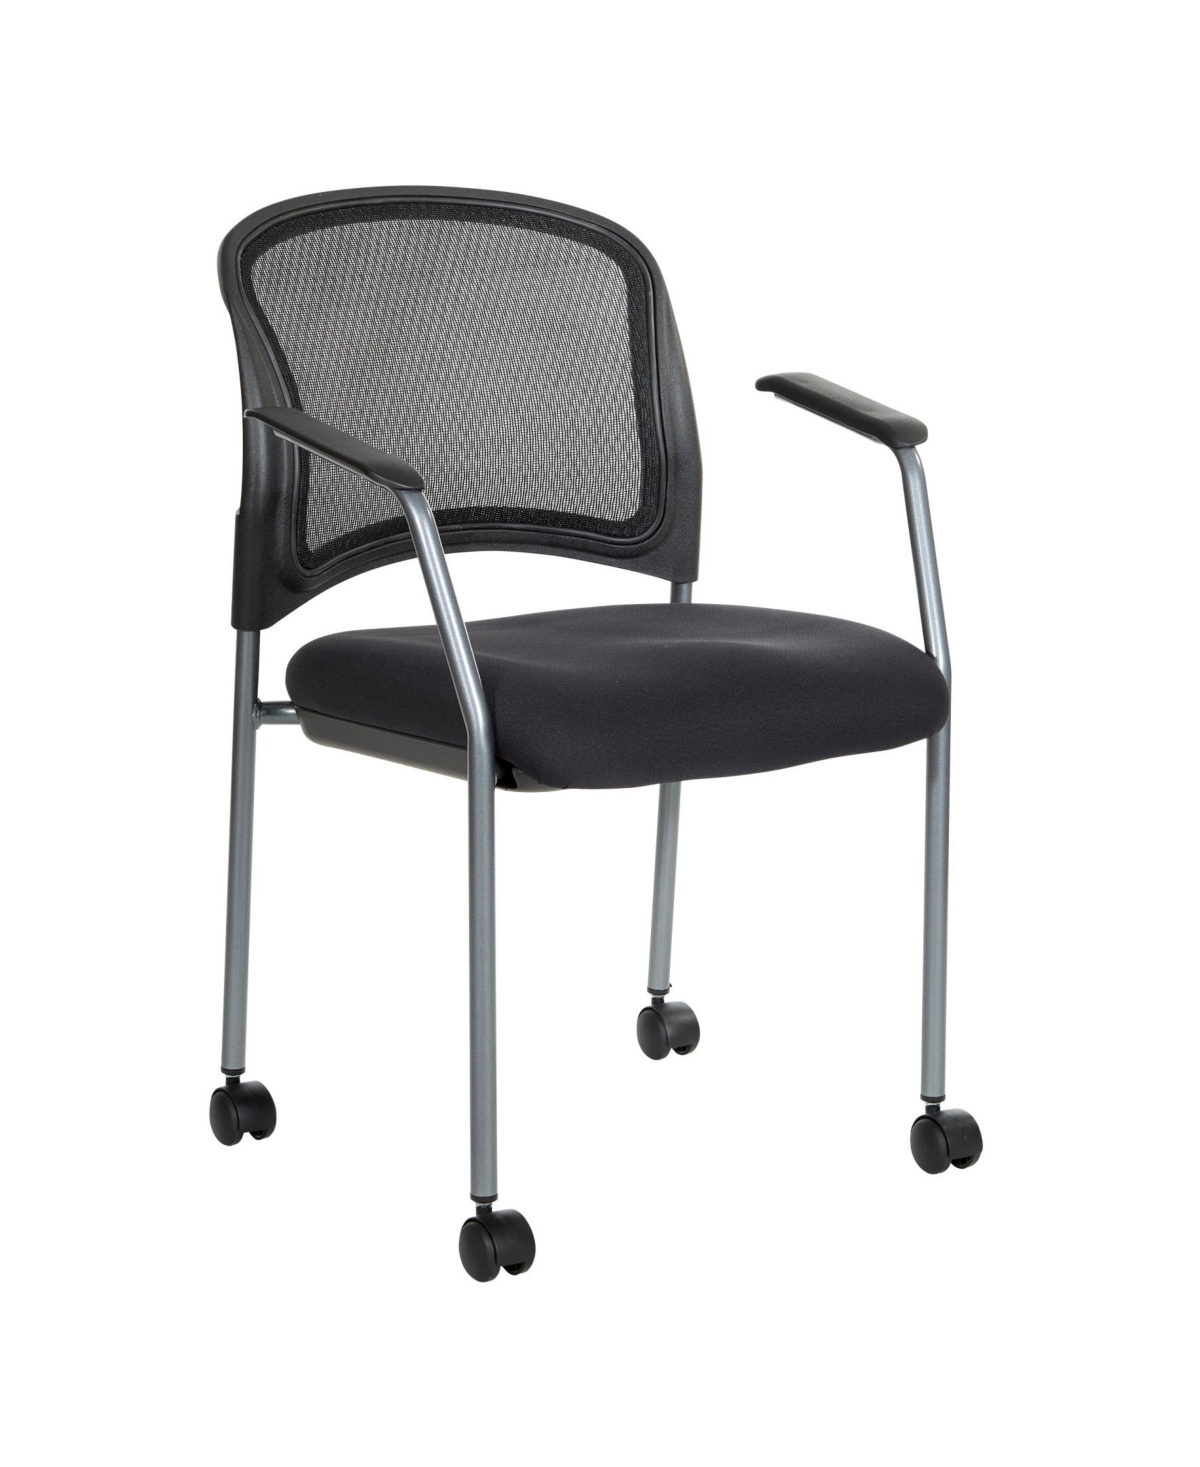 Osp Home Furnishings Titanium Finish Visitors Office Chair